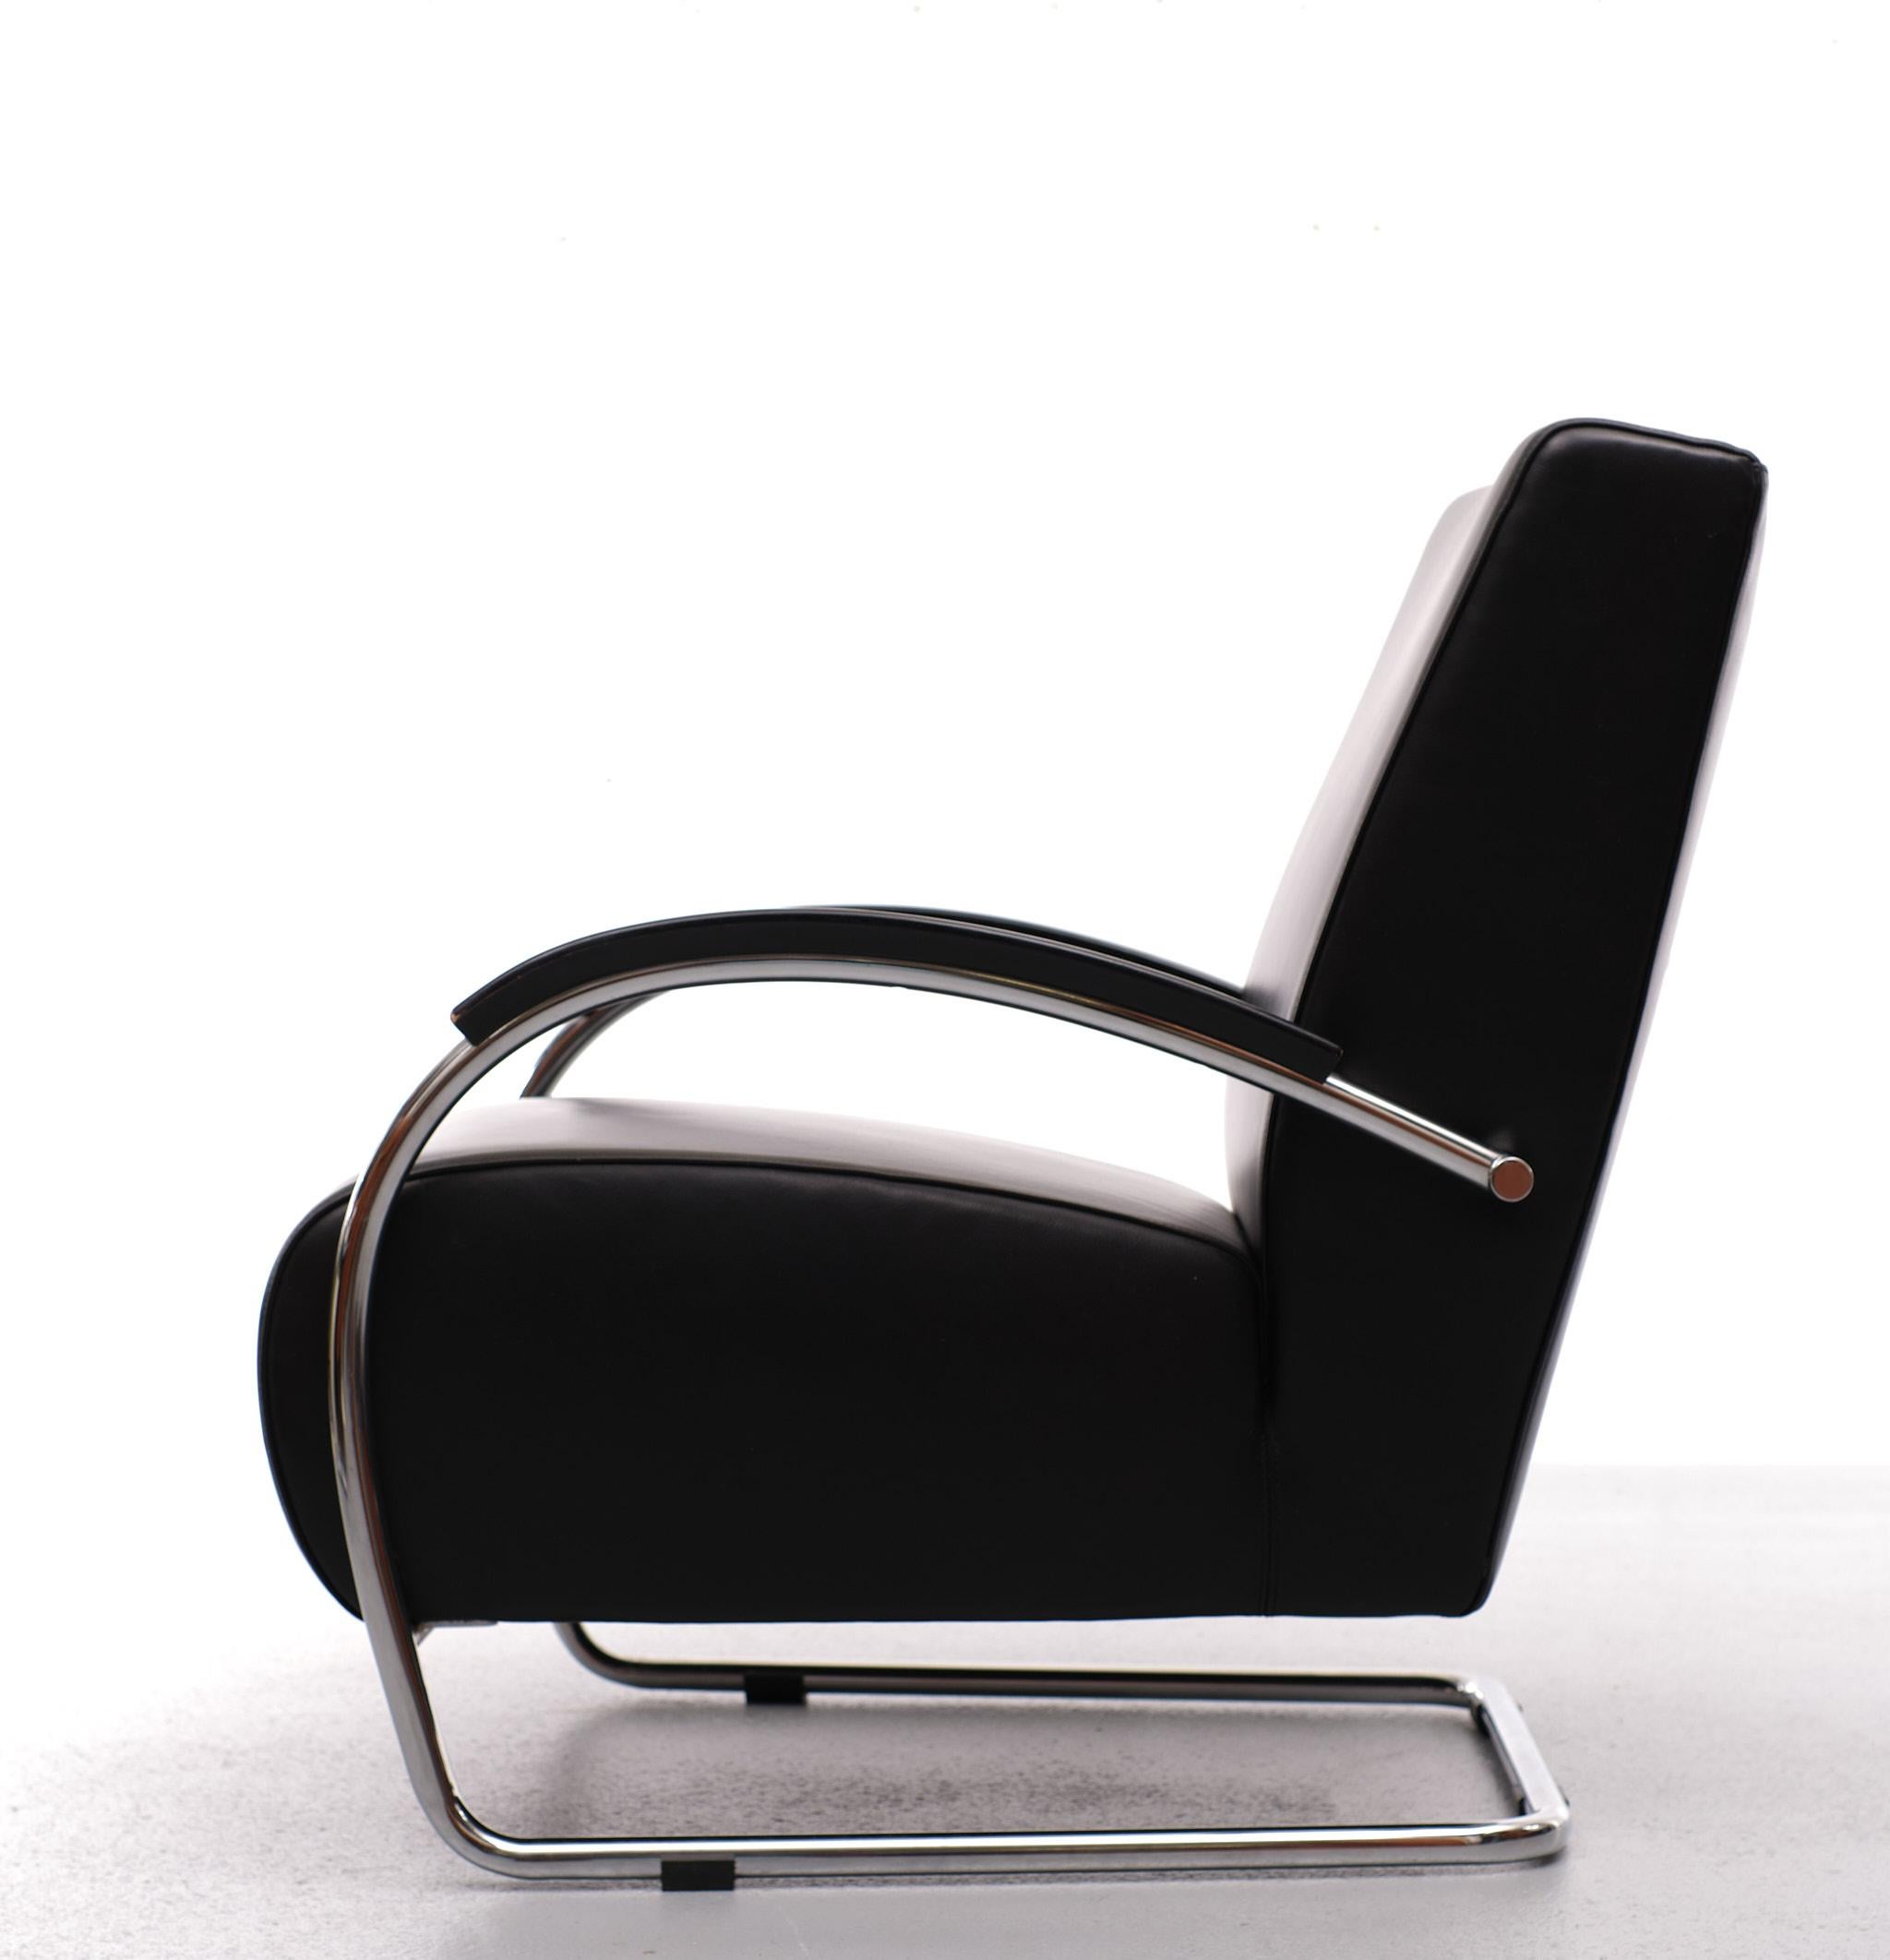 Now for sale The perfect lounge chair. Top quality black leather seating 
on a cantilever chrome frame, beautiful curved armrests. made off Black 
ebonized beechwood. Manufactured by Molinari Italy. Very good seating 
comfort. Lovely Bauhaus